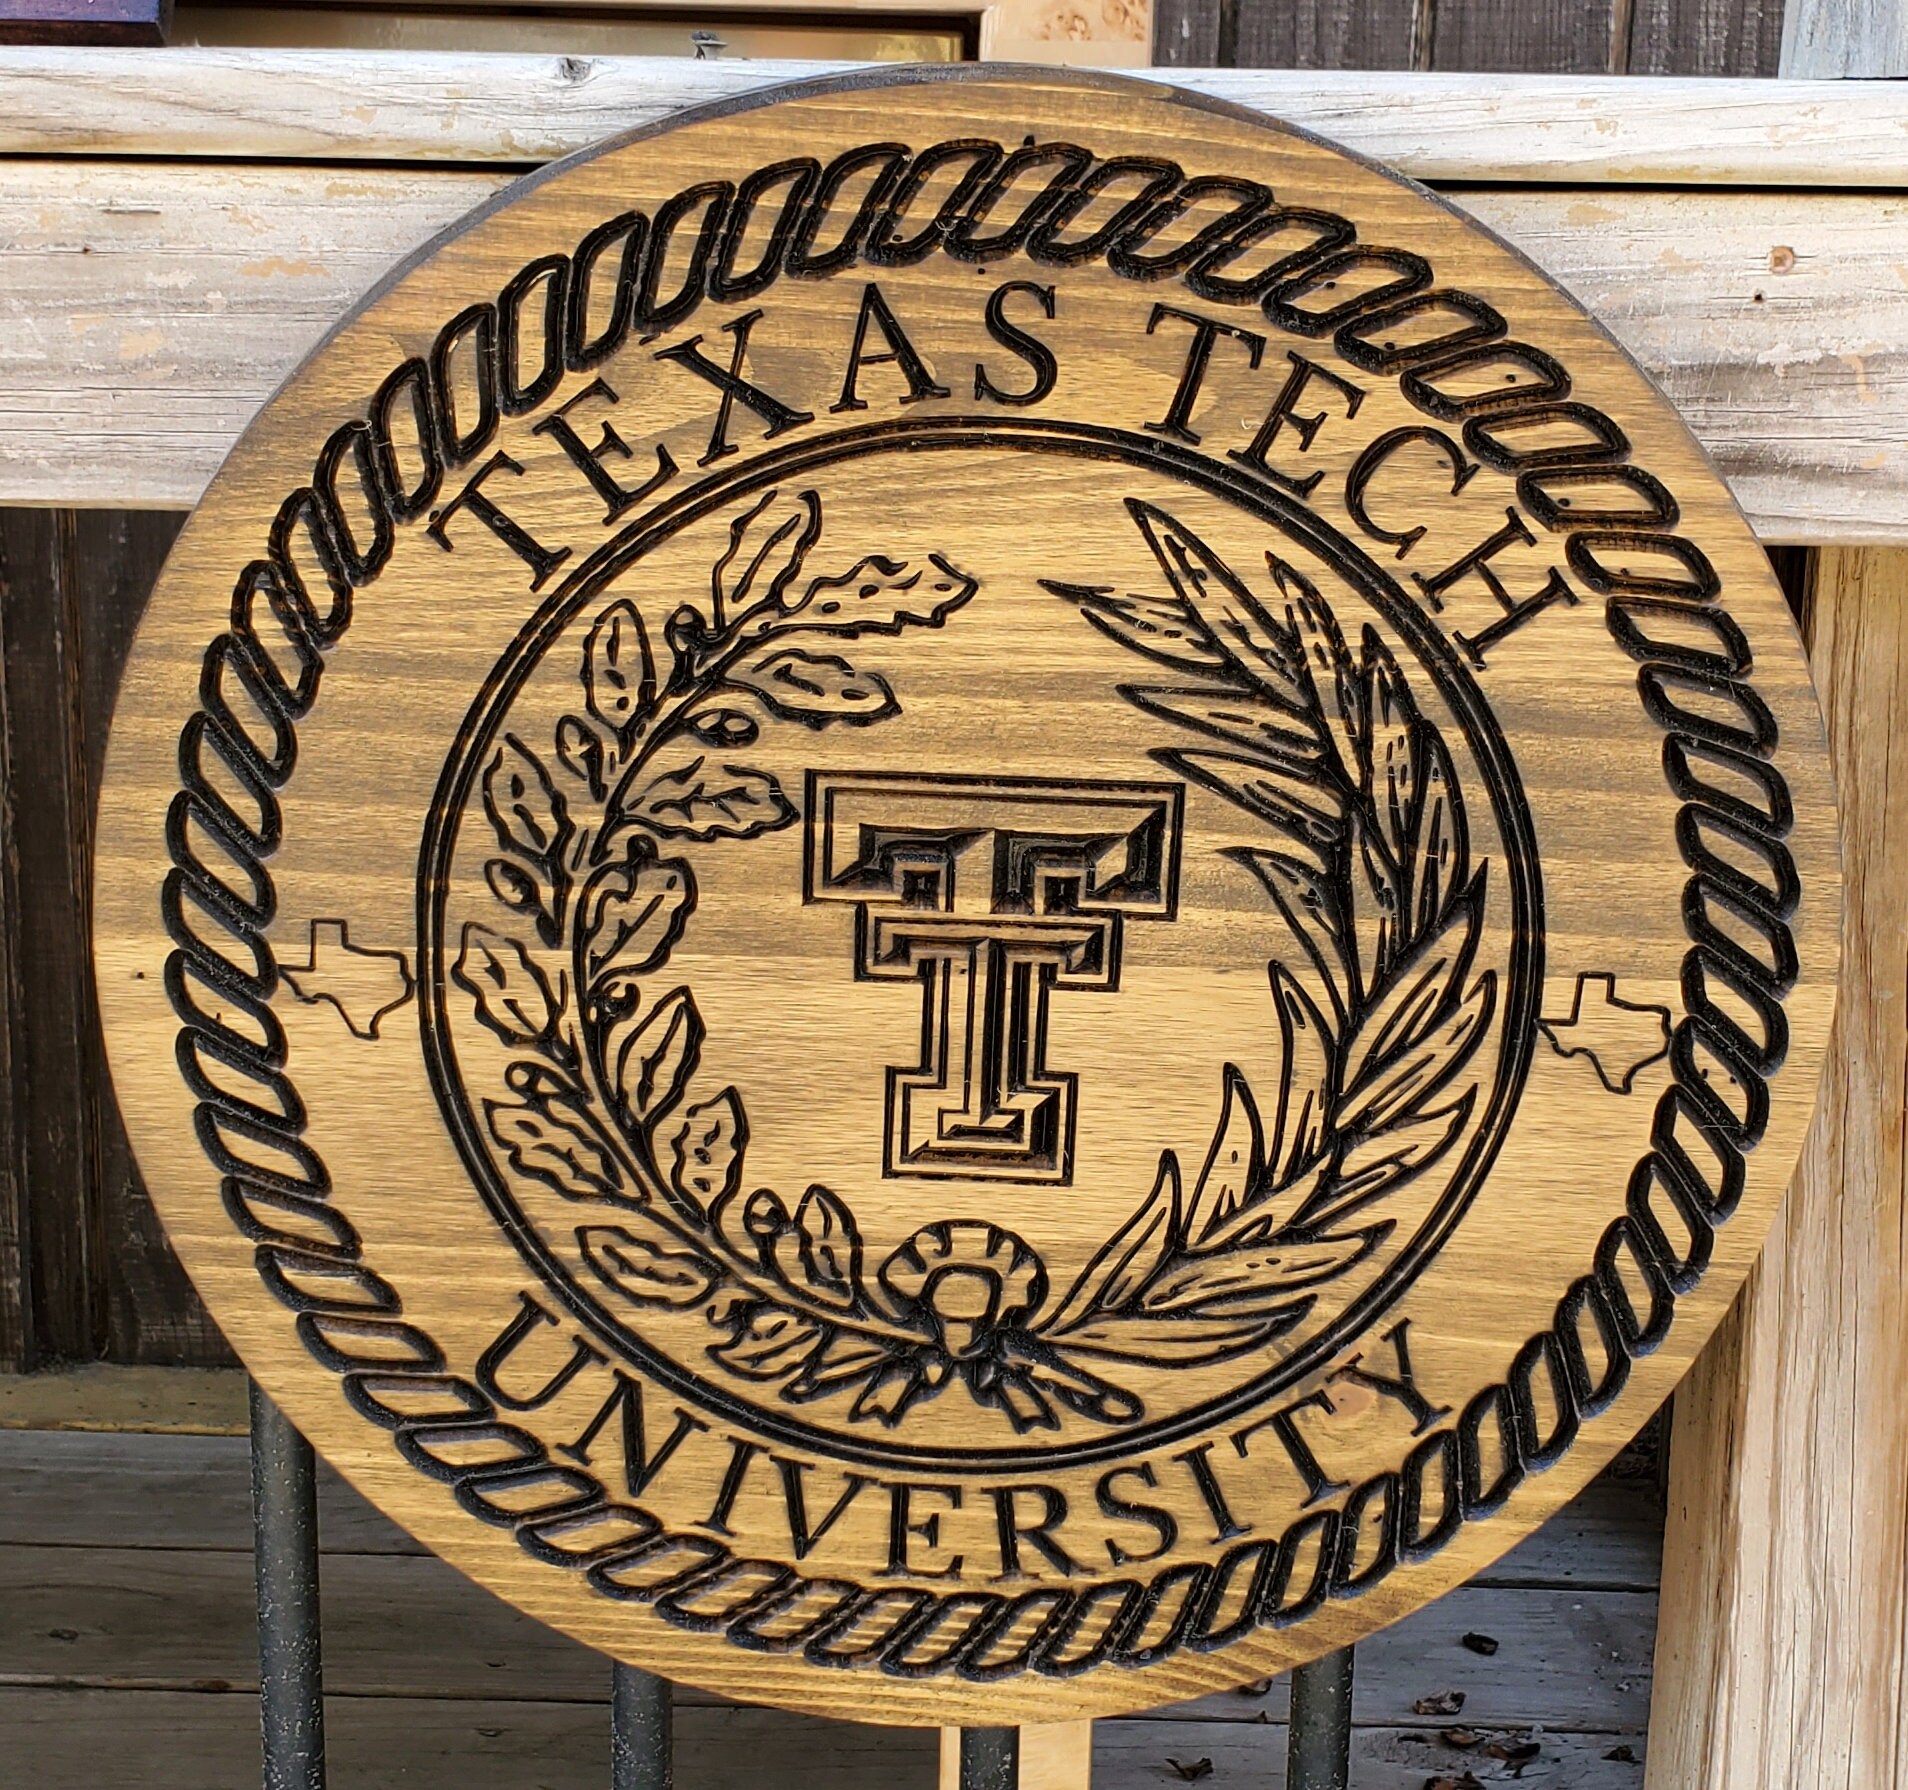 Texas Tech University Lubbock Texas Personal Gift College image picture